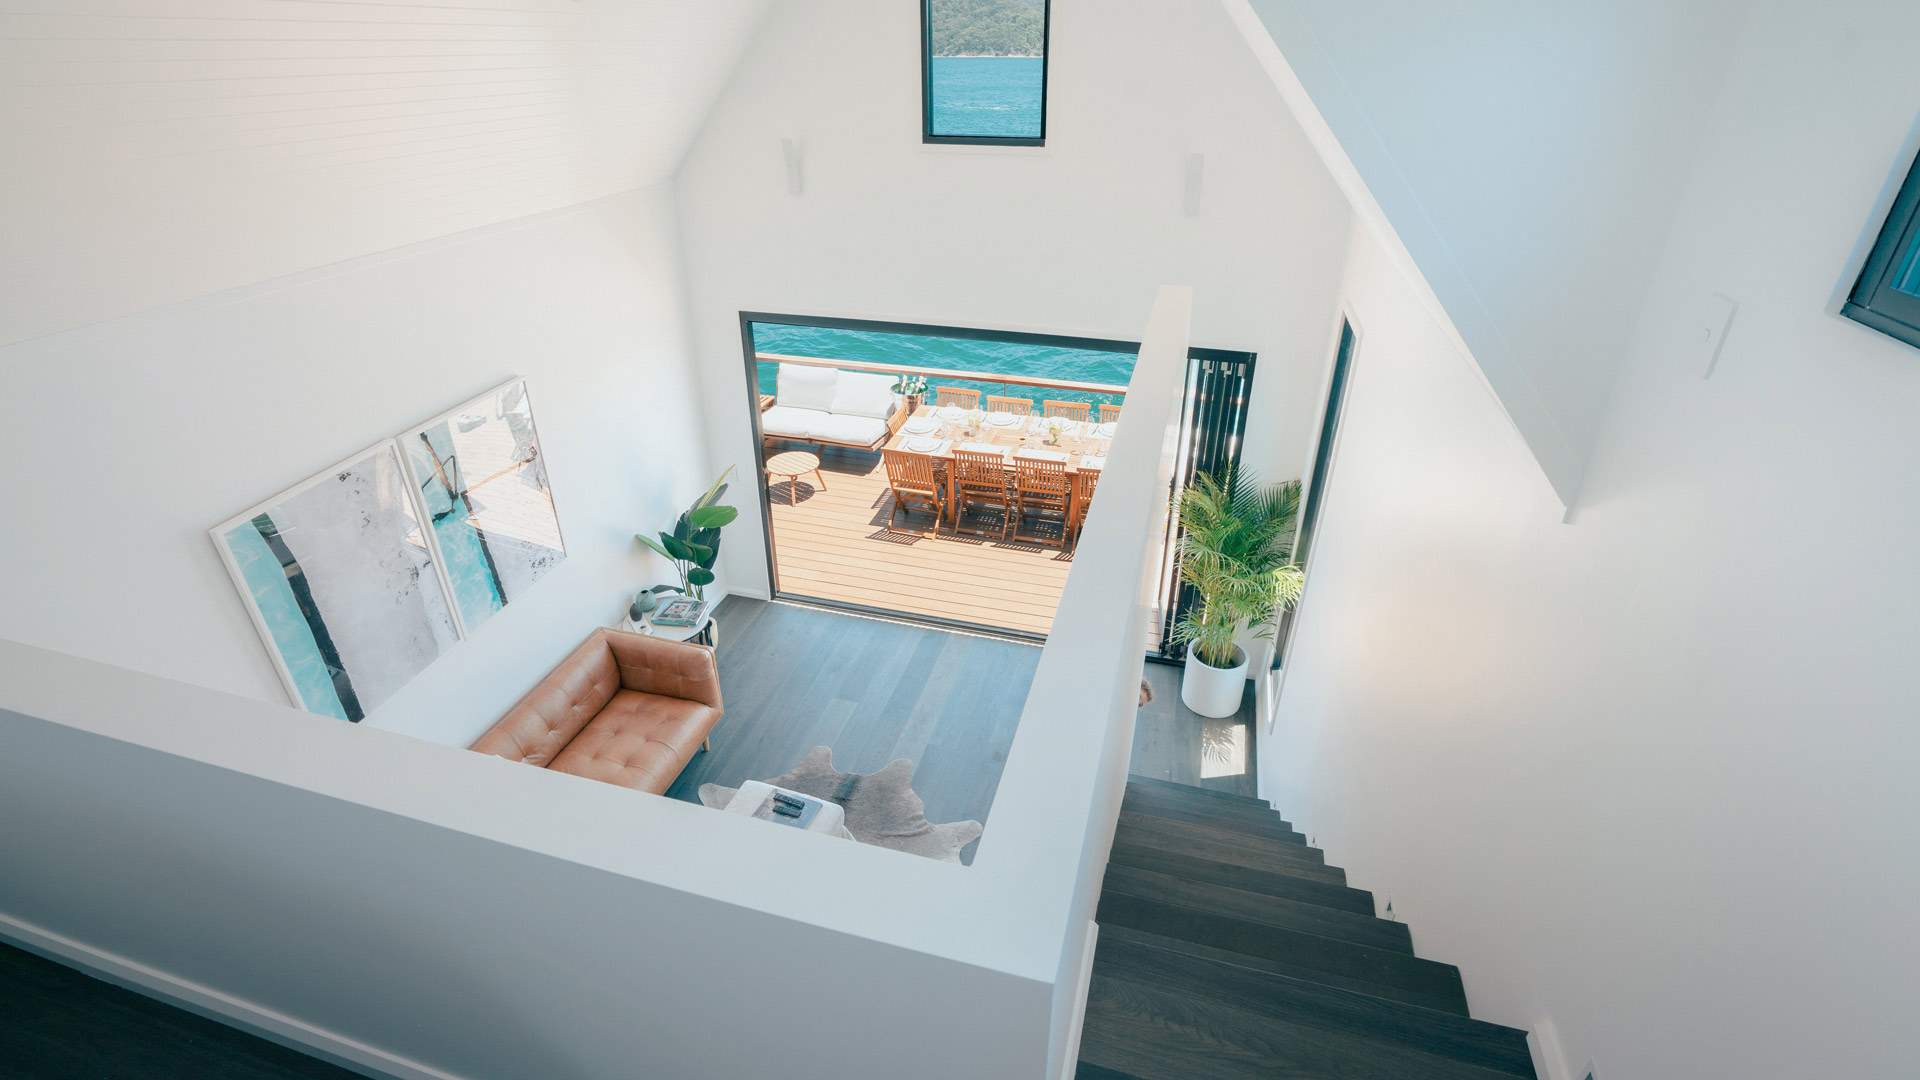 Lilypad Is the Northern Beaches' New Members-Only Luxury Floating Villa